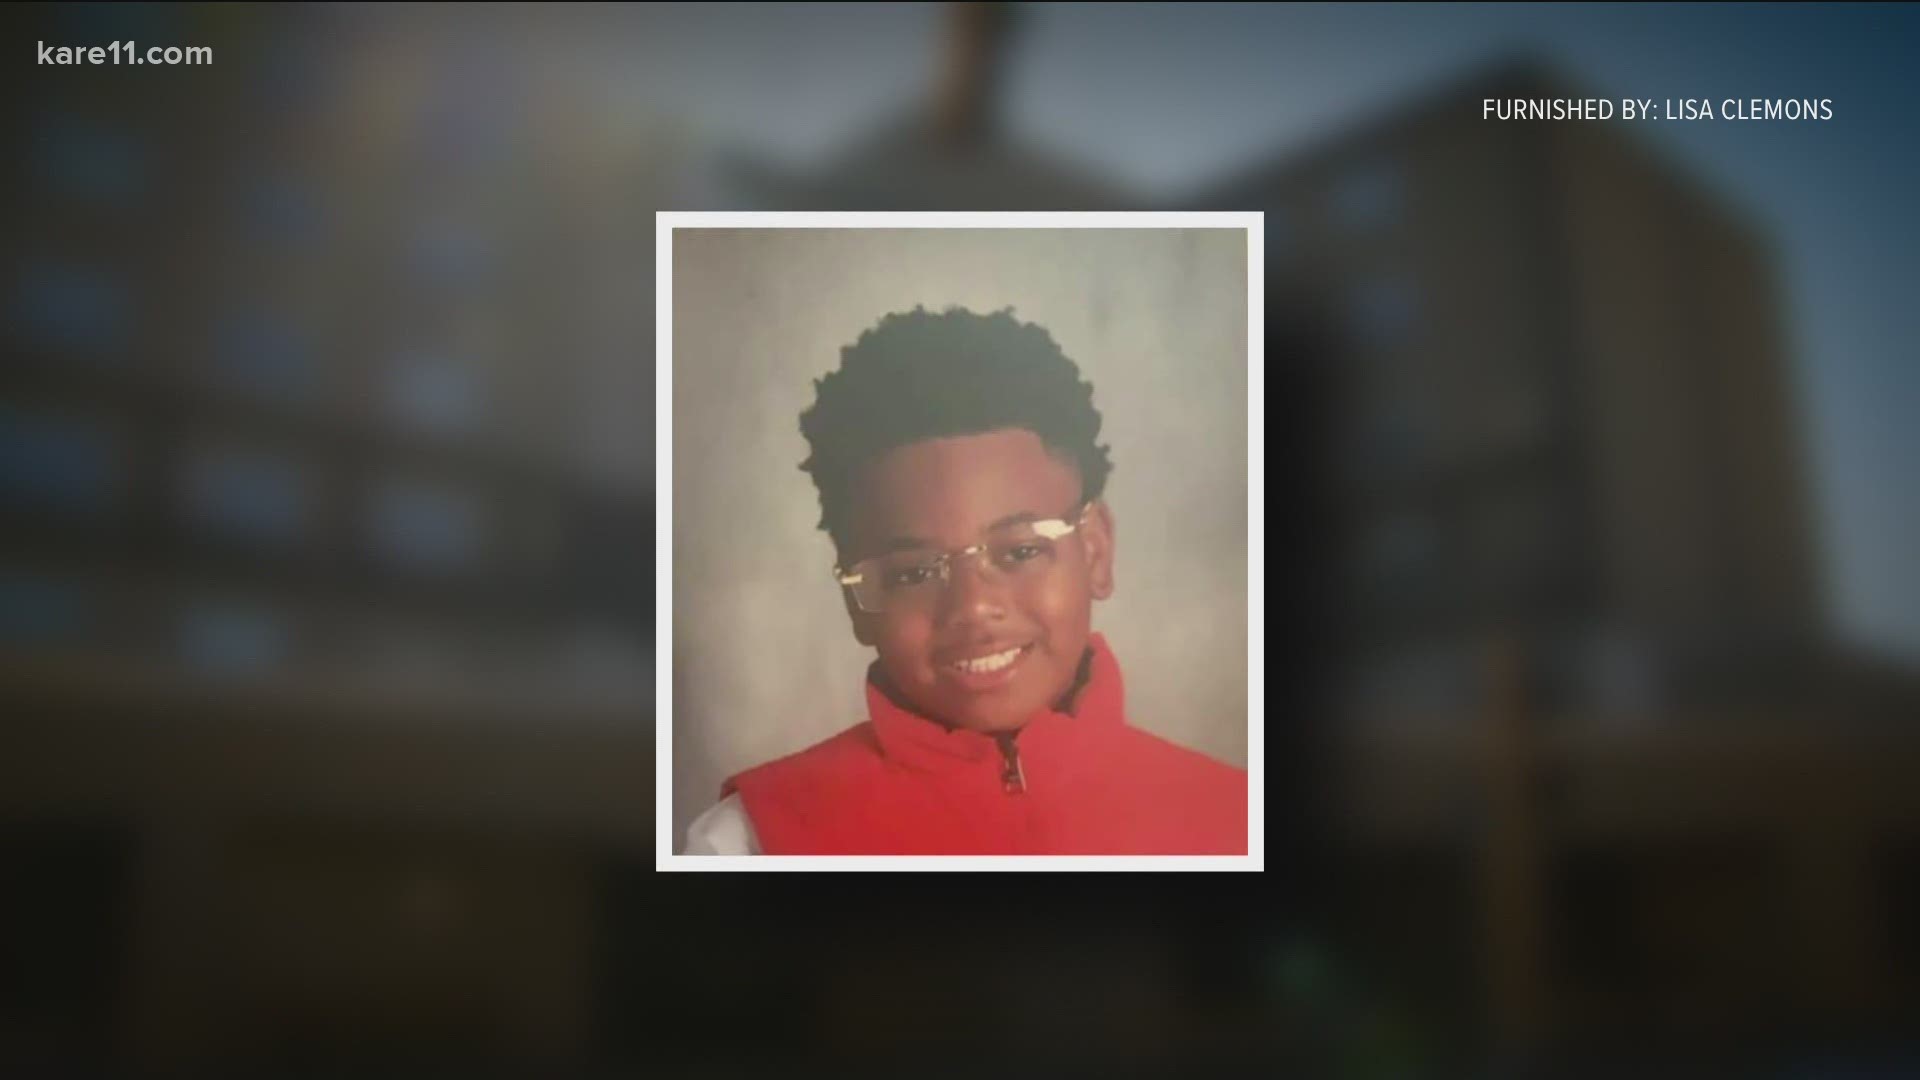 Ladavionne Garrett Jr. remains hospitalized nearly 60 days after he was shot. A reward is being offered for information in his case and two other child shootings.